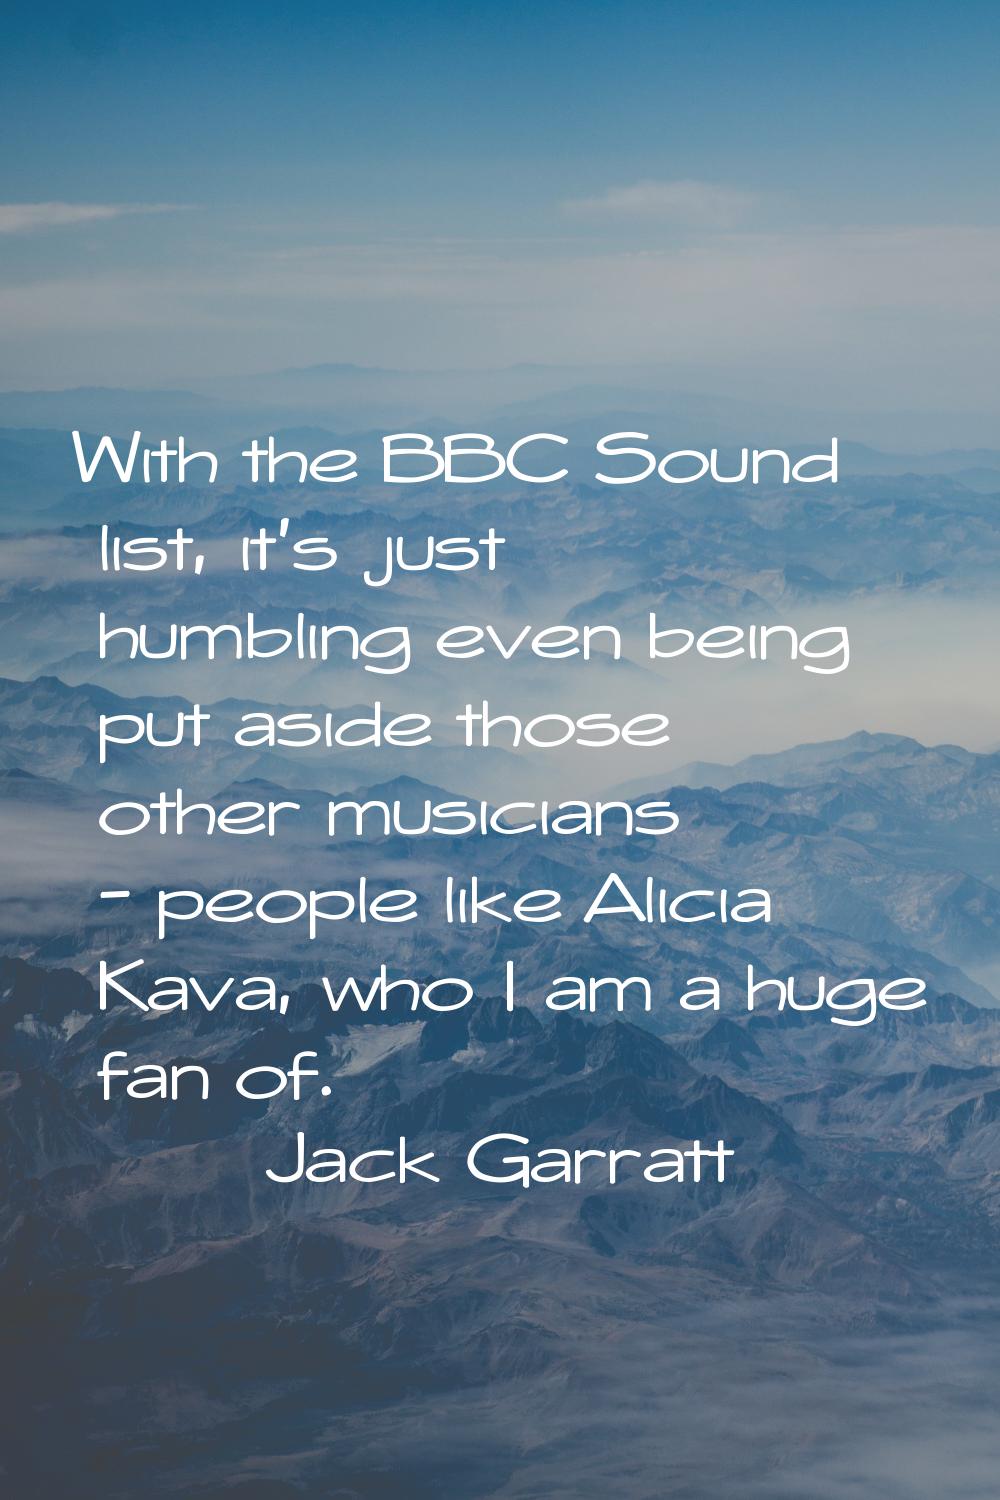 With the BBC Sound list, it's just humbling even being put aside those other musicians - people lik